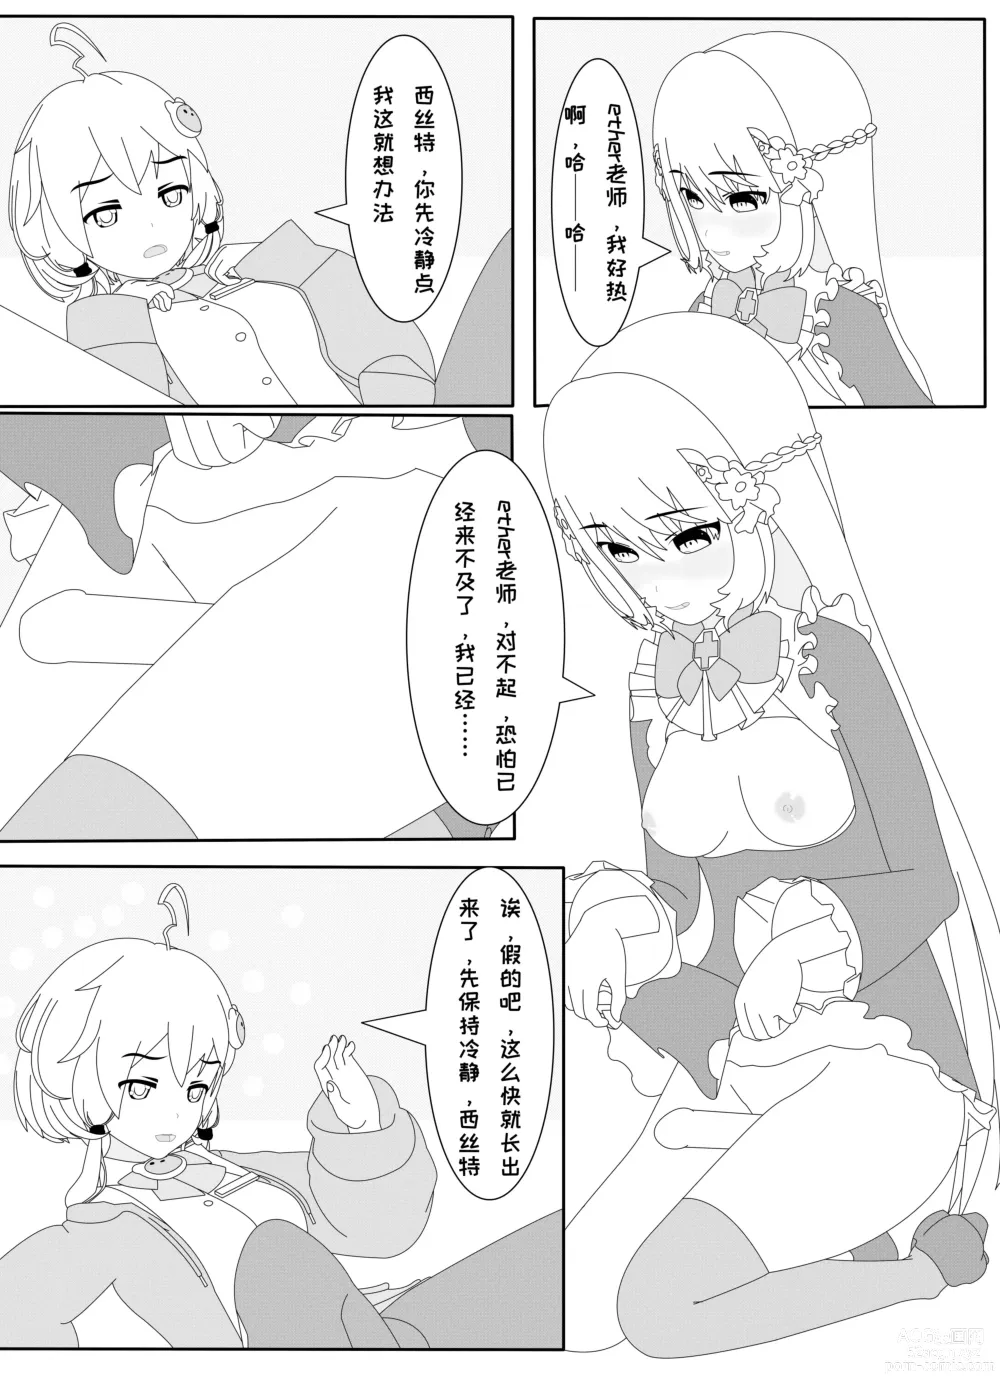 Page 18 of doujinshi 鲸之恋2（西丝特Xether）